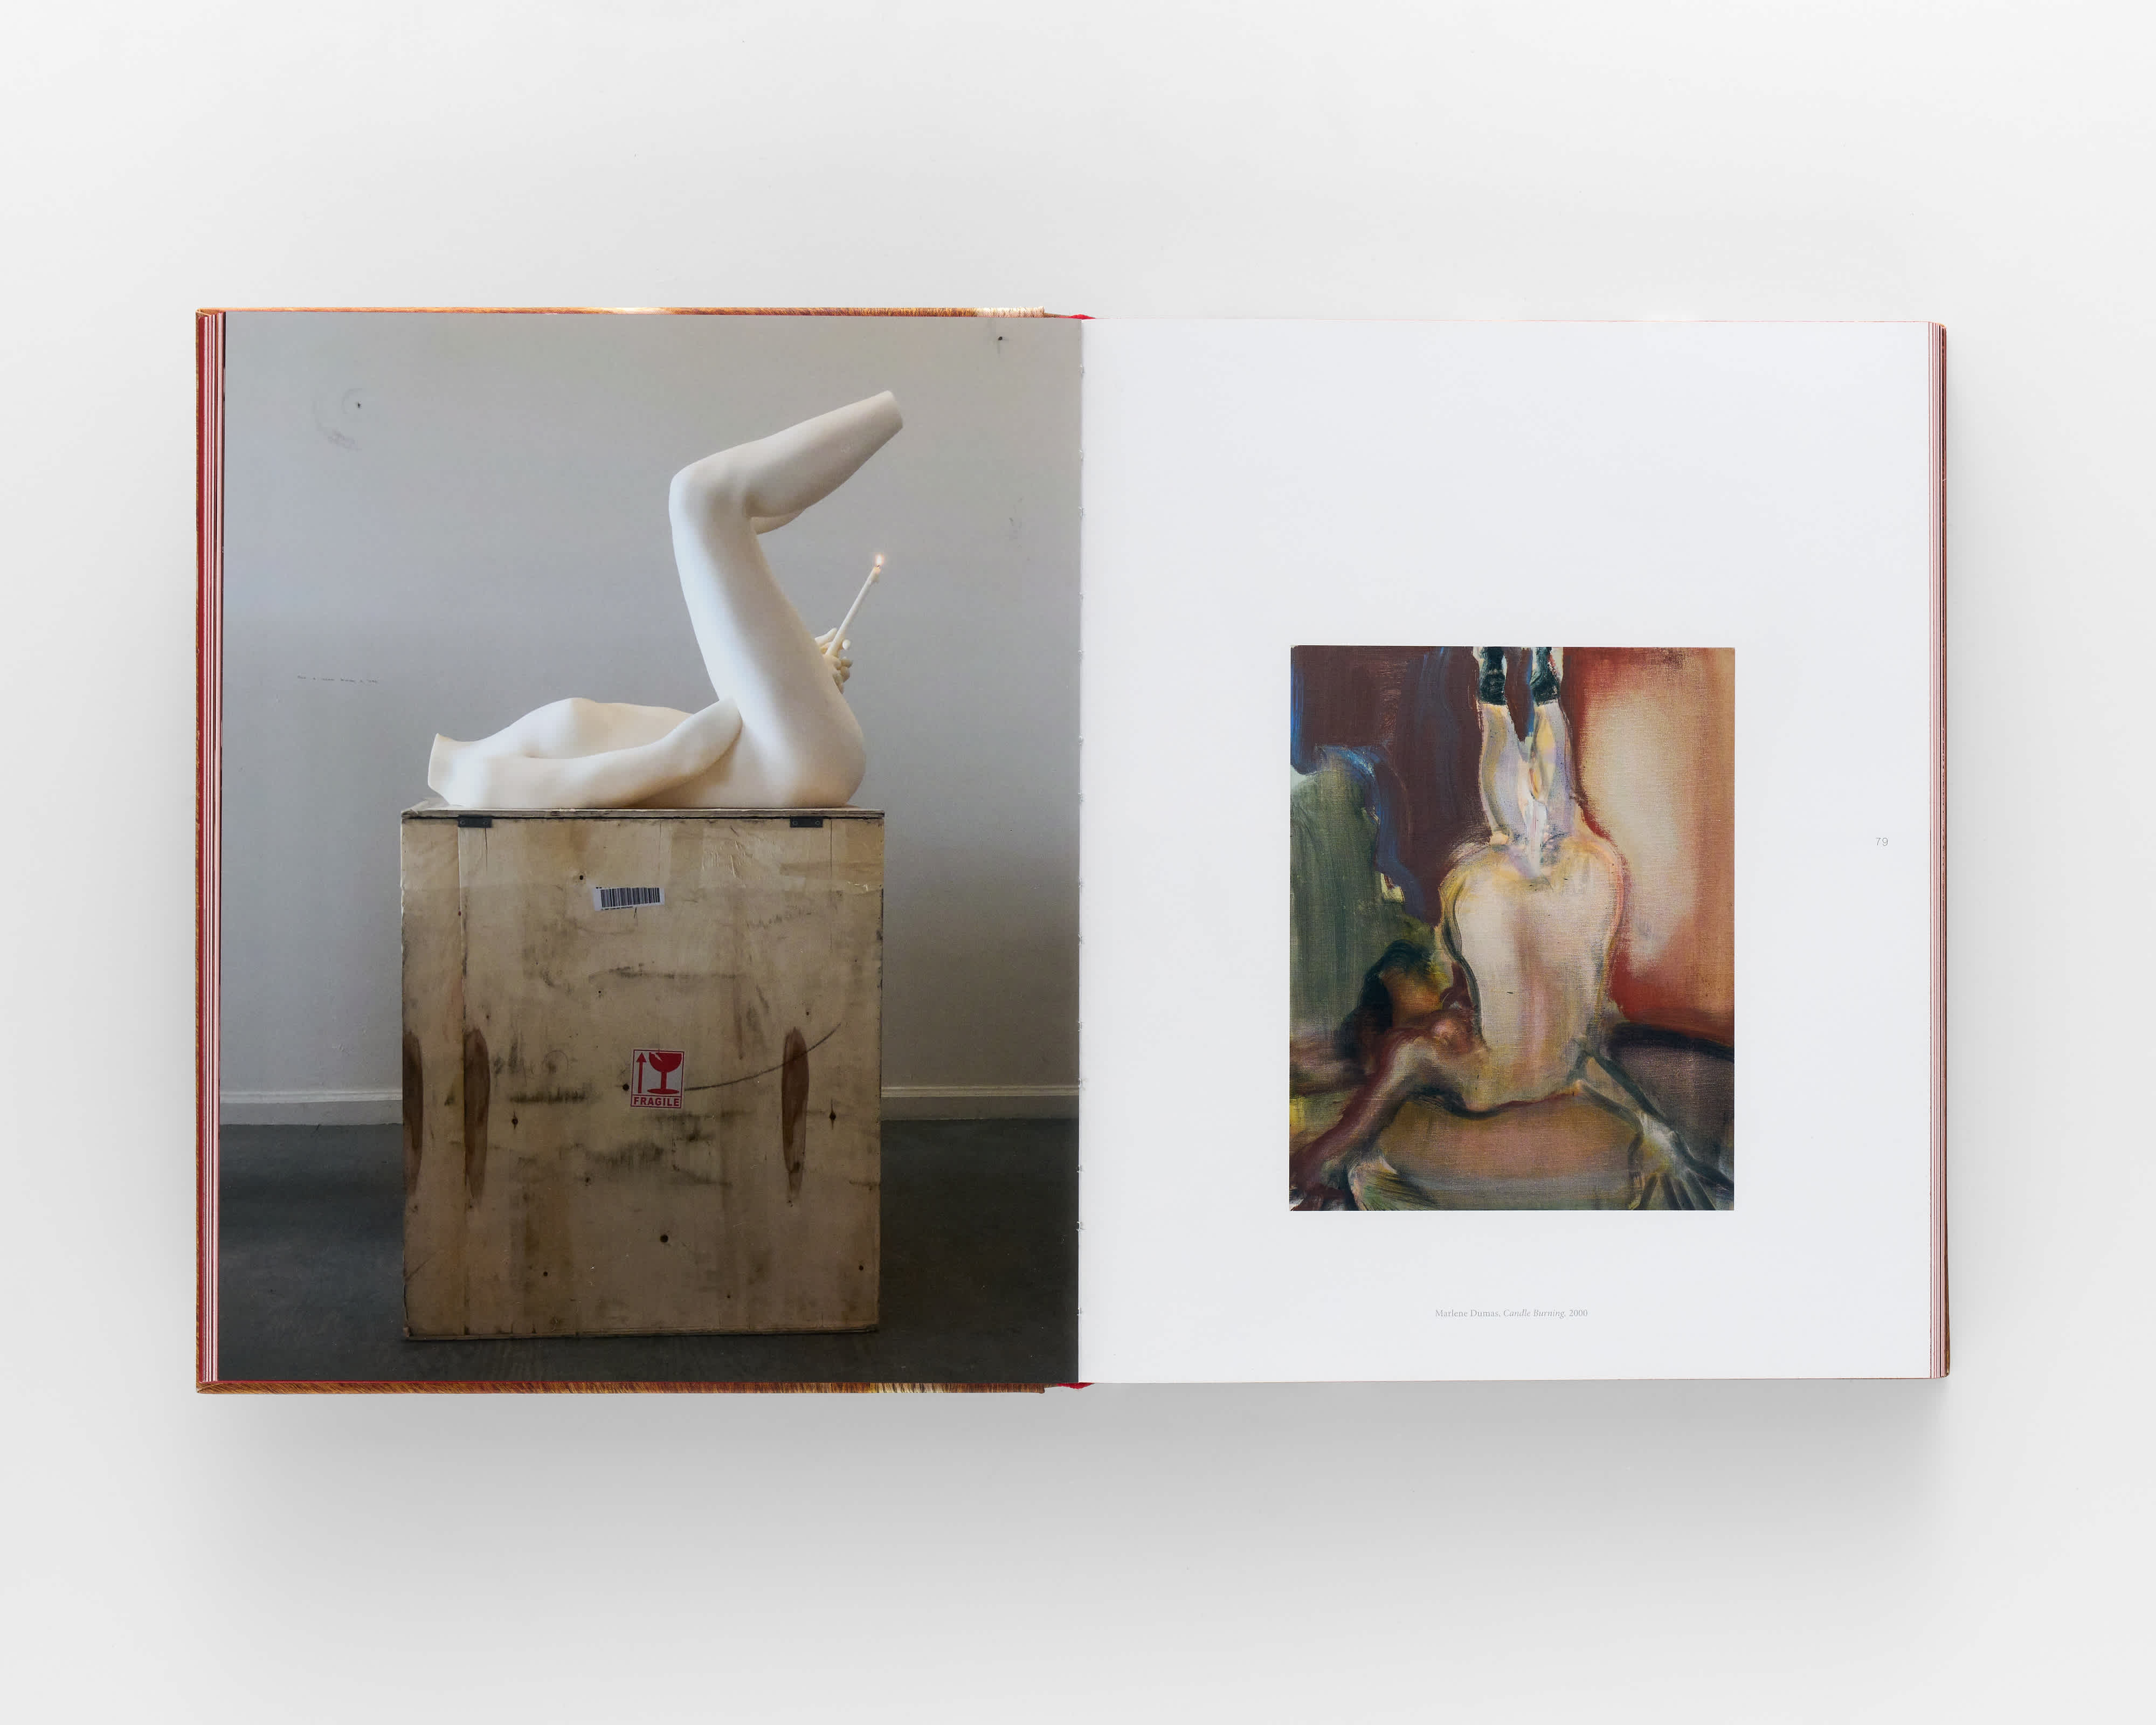 An open book on a grey background. The left page features a sculpture of a human body positioned on top of a shipping crate. The body has its legs raised in the air and holds a candle at its genitals. 

The right page features a painting by Marlene Dumas titled 'Candle Burning' in which a figure lays on its back, legs in the air. 